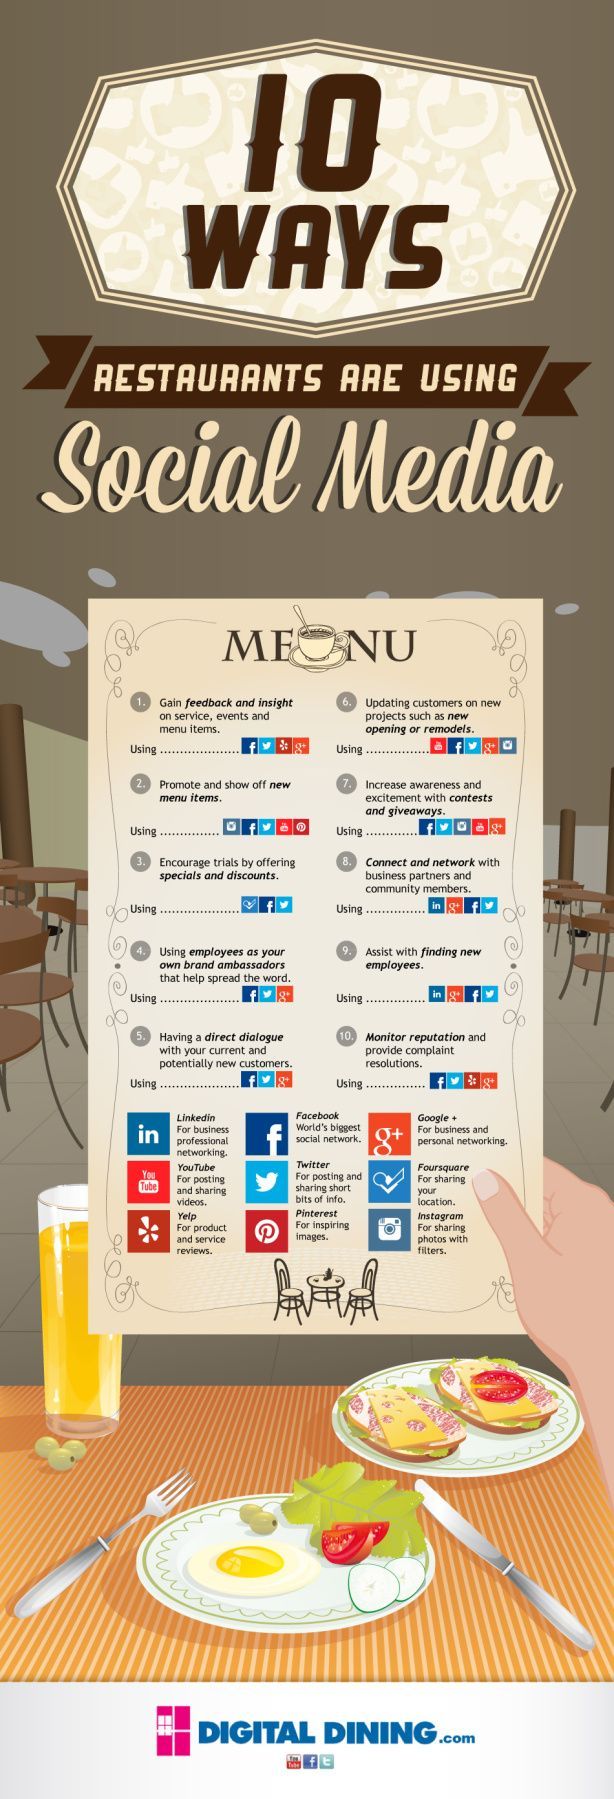 Social Media Infographic List Of 101 Cool Diner Names Infographicnow Com Your Number One Source For Daily Infographics Visual Creativity